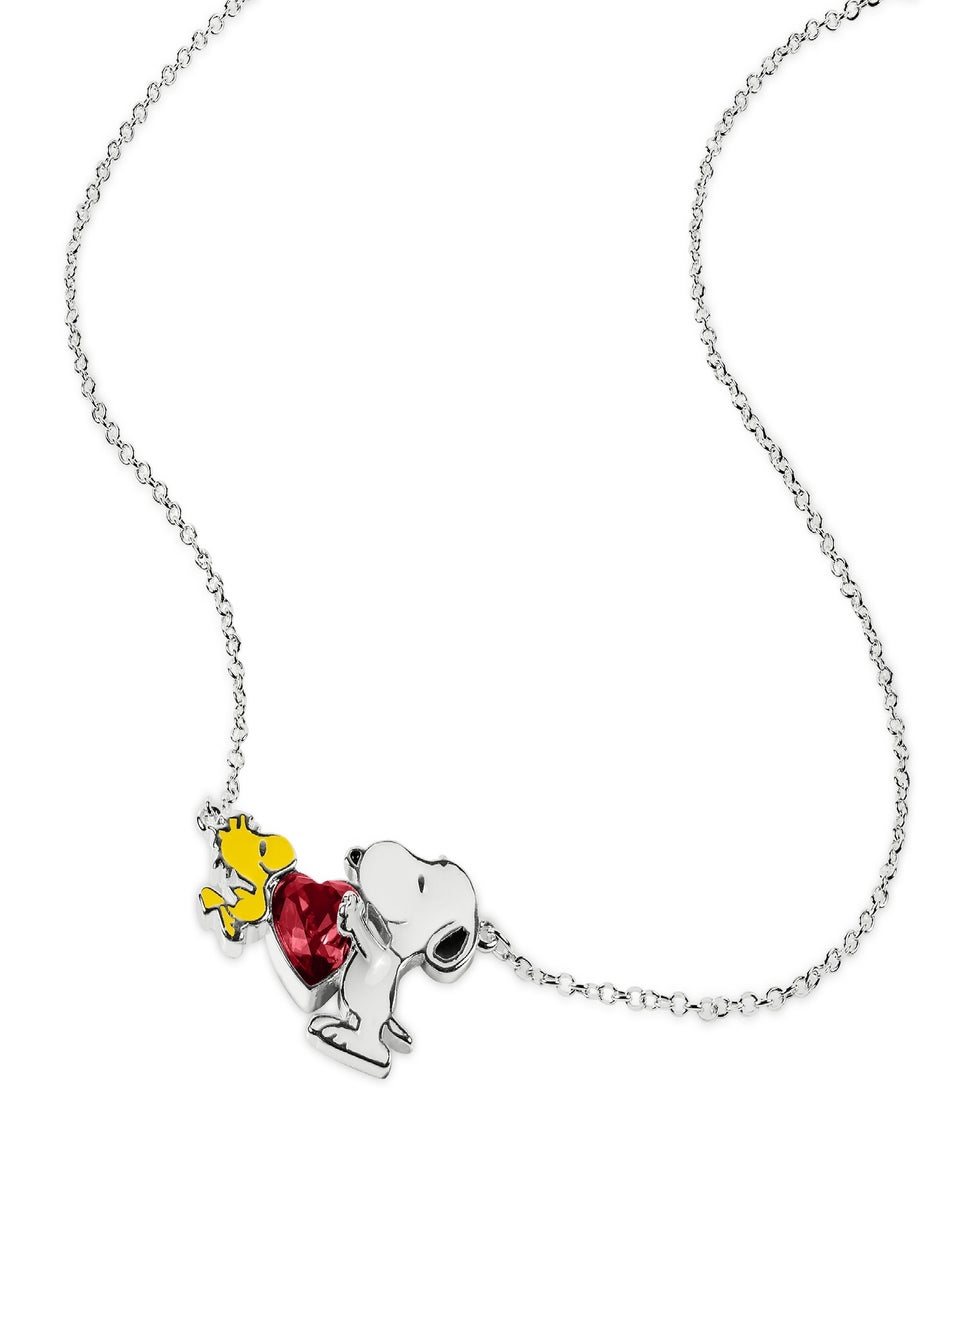 Peanuts Snoopy & Woodstock Heart Charm Necklace